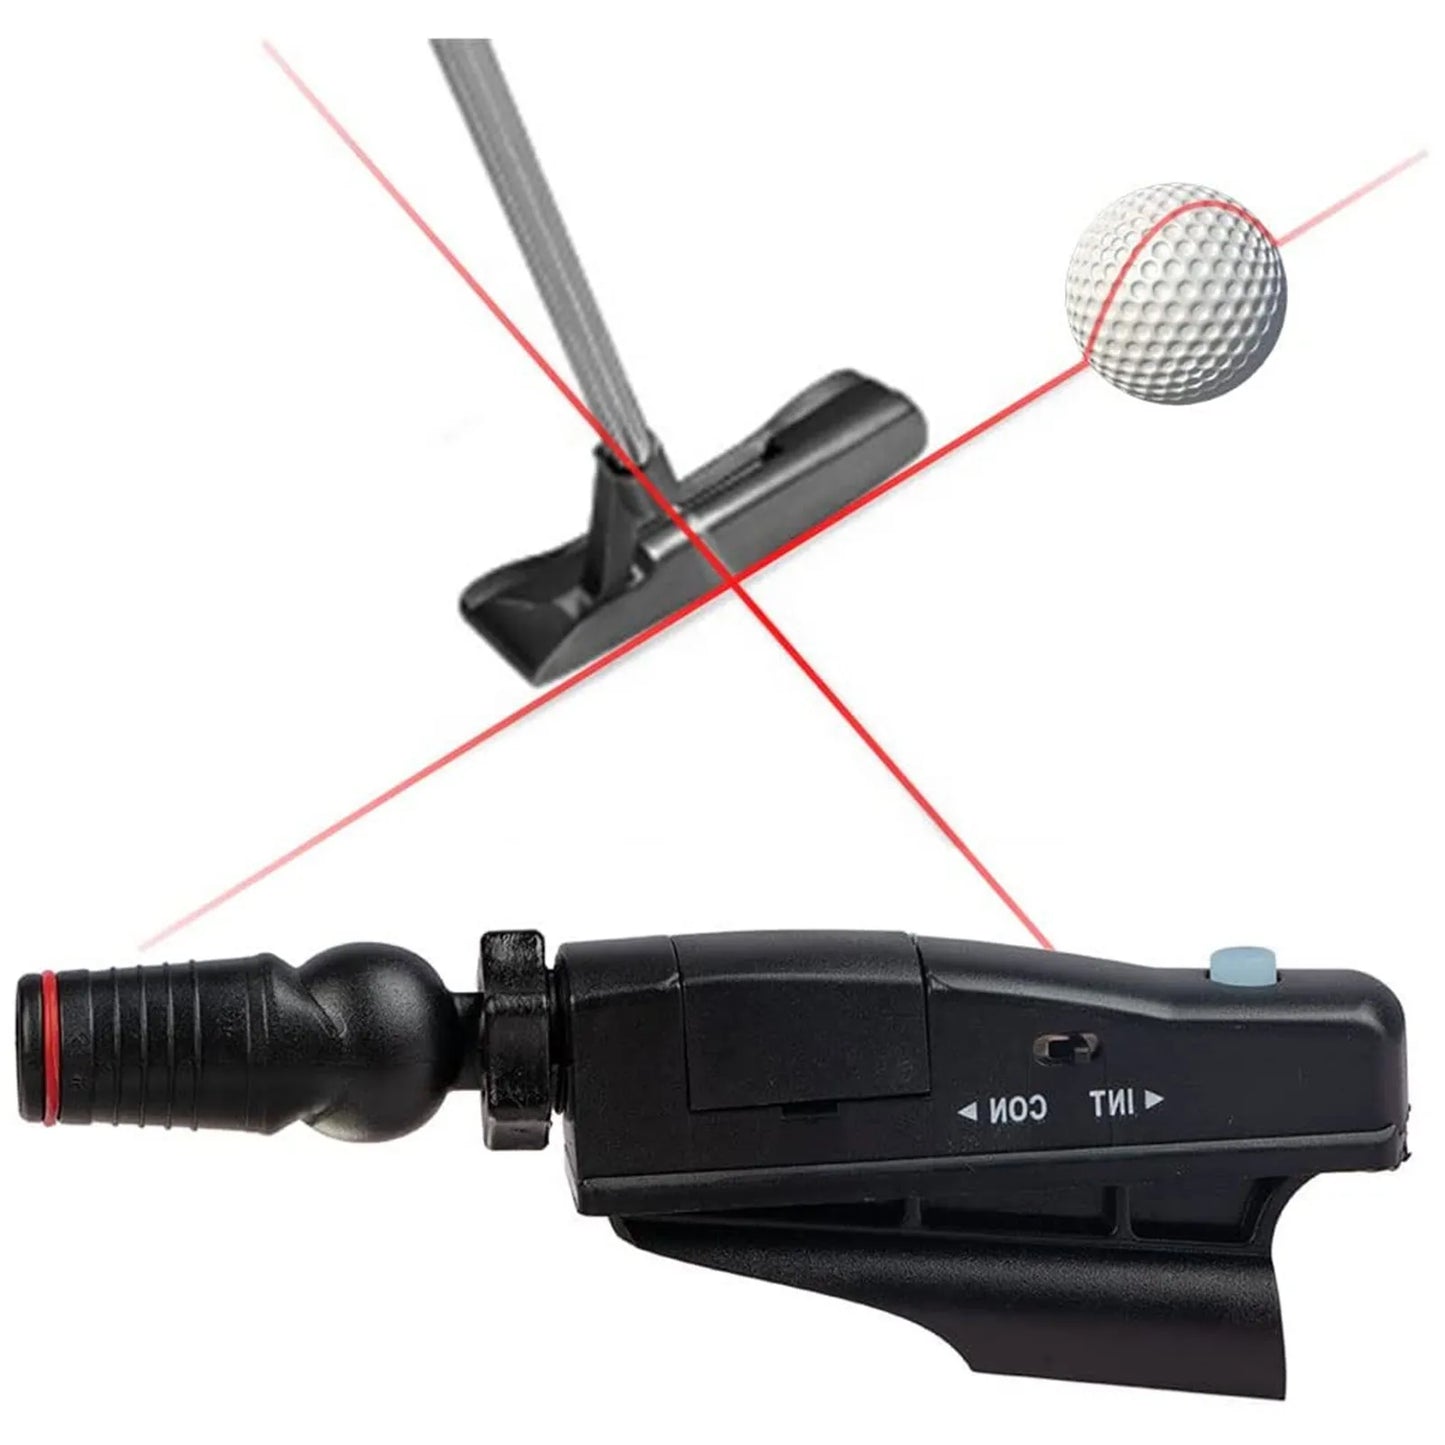 Golf Putter Laser Training Aid - Down The Line Putting Improvement Aid, Easily Attachable, Easy To Use